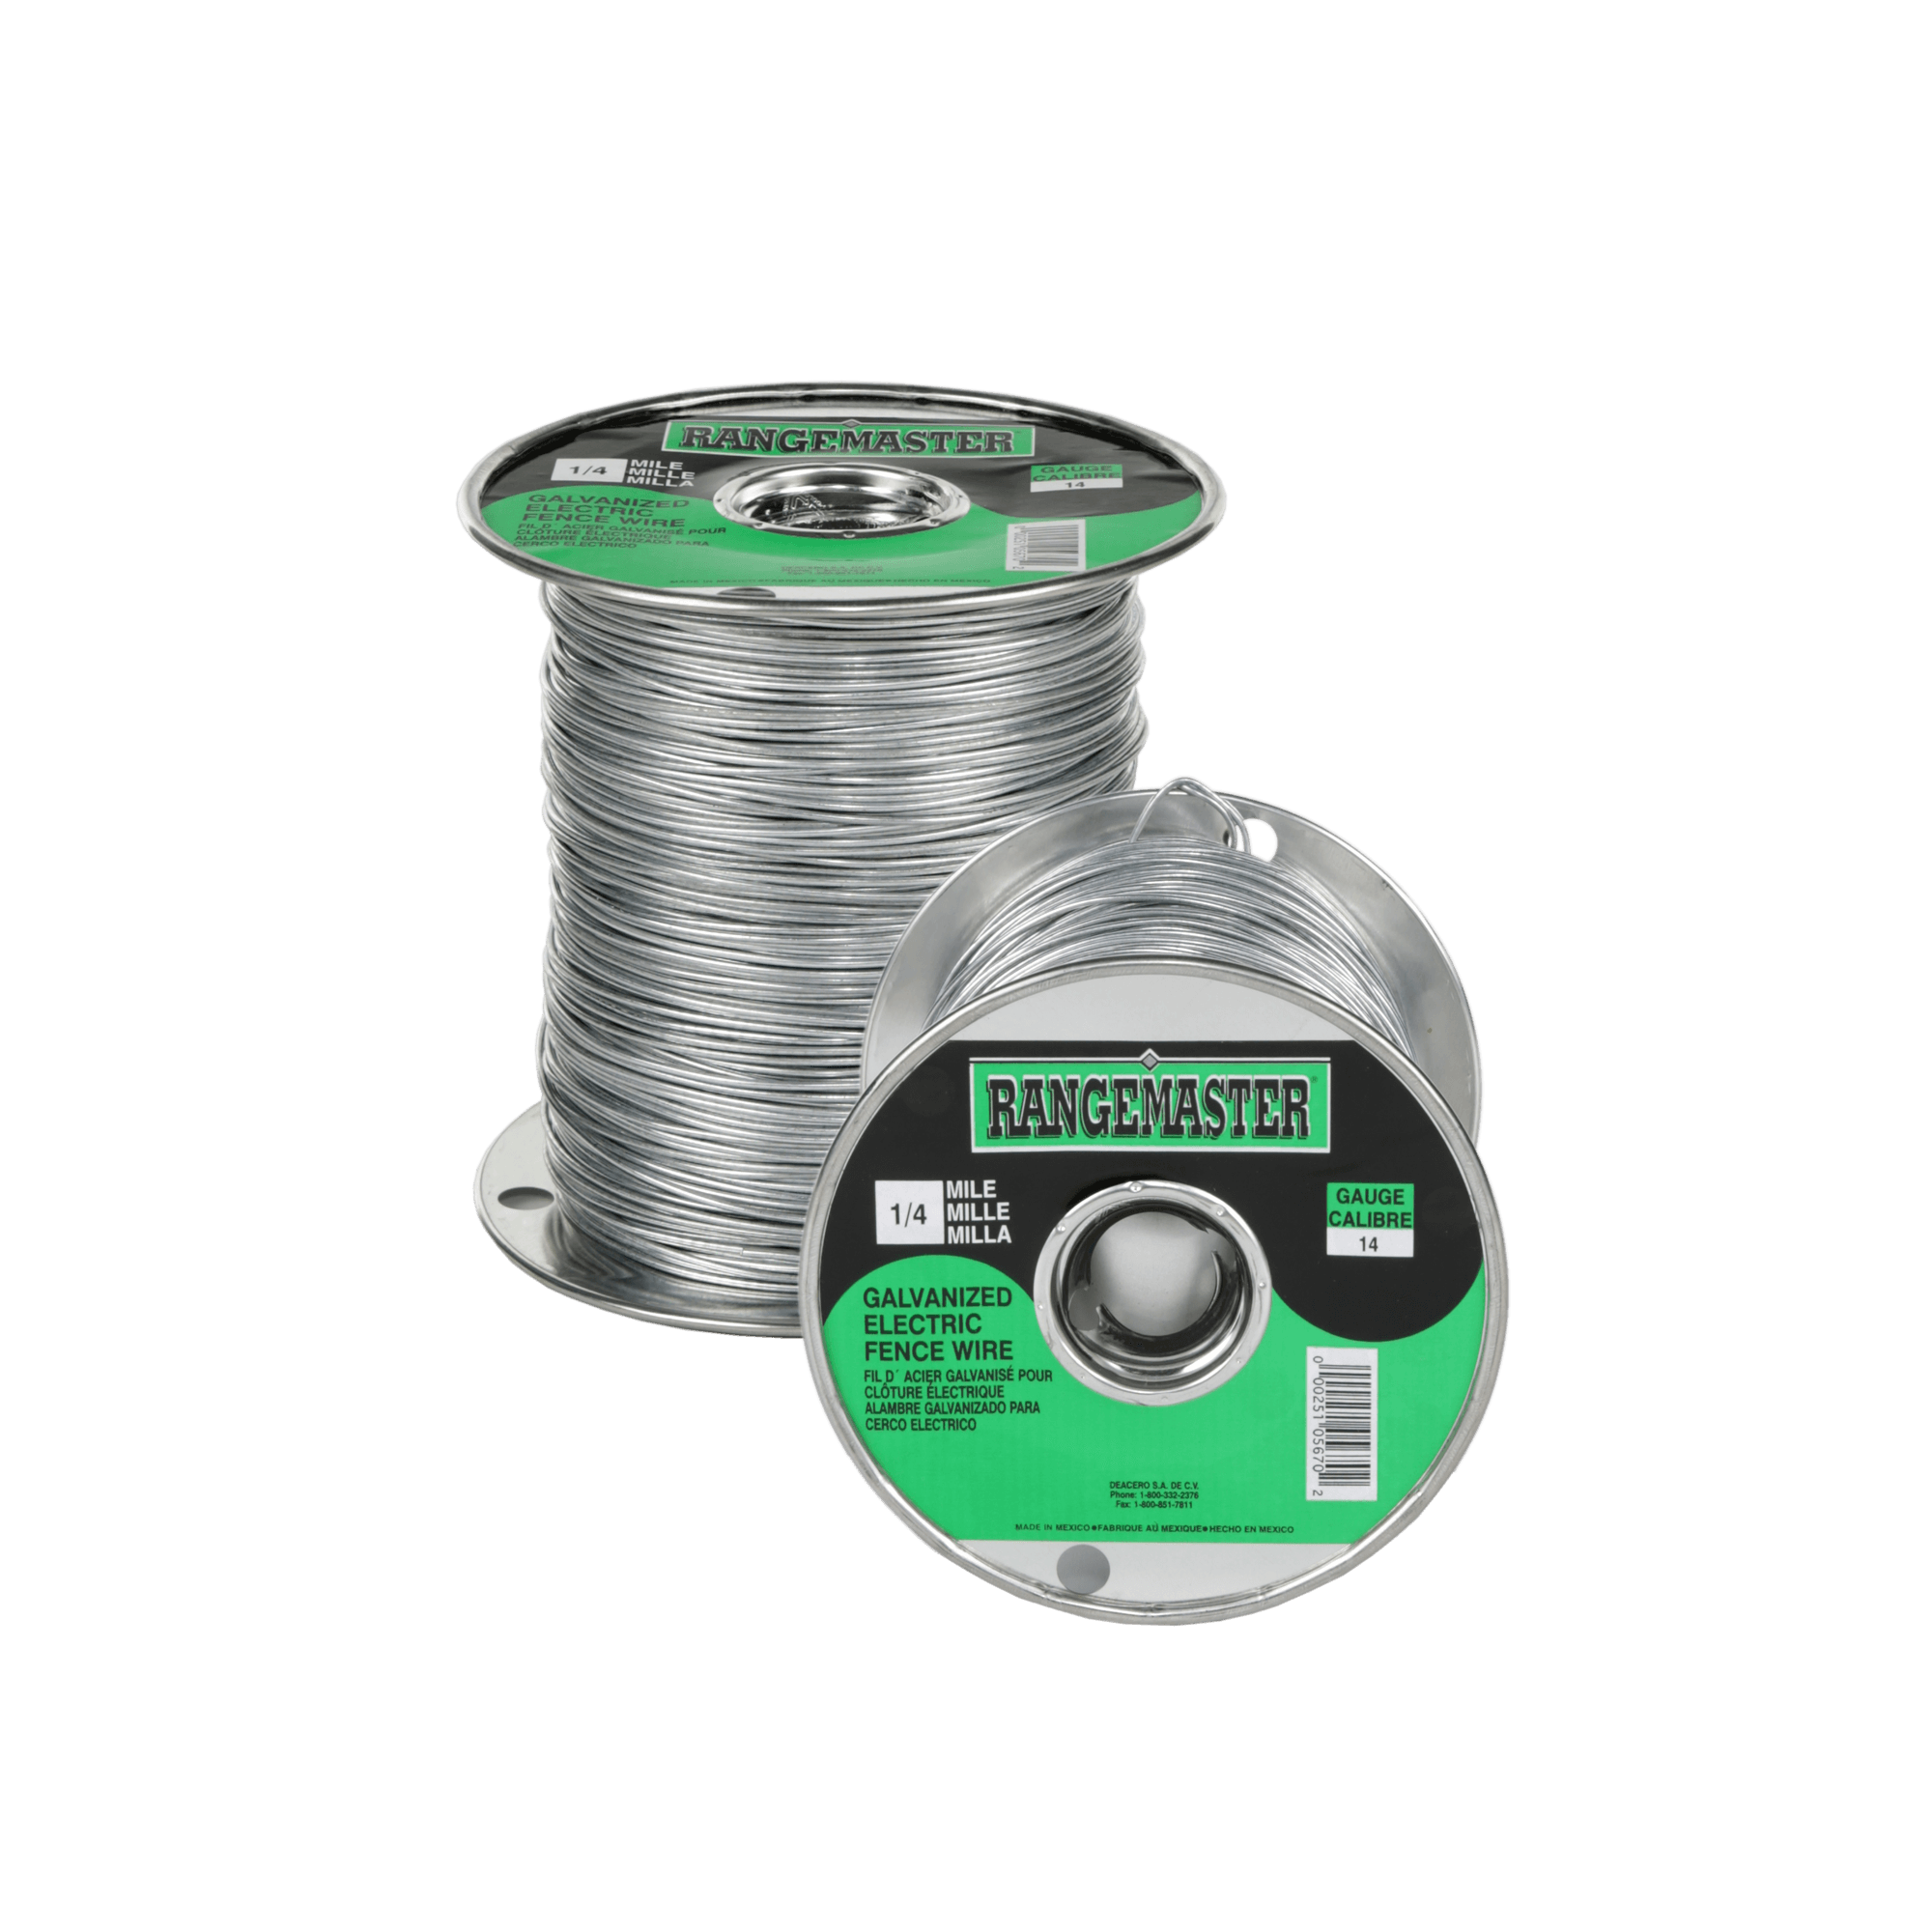 03-rangemaster-electric-fence-wire-spools-14-14mile